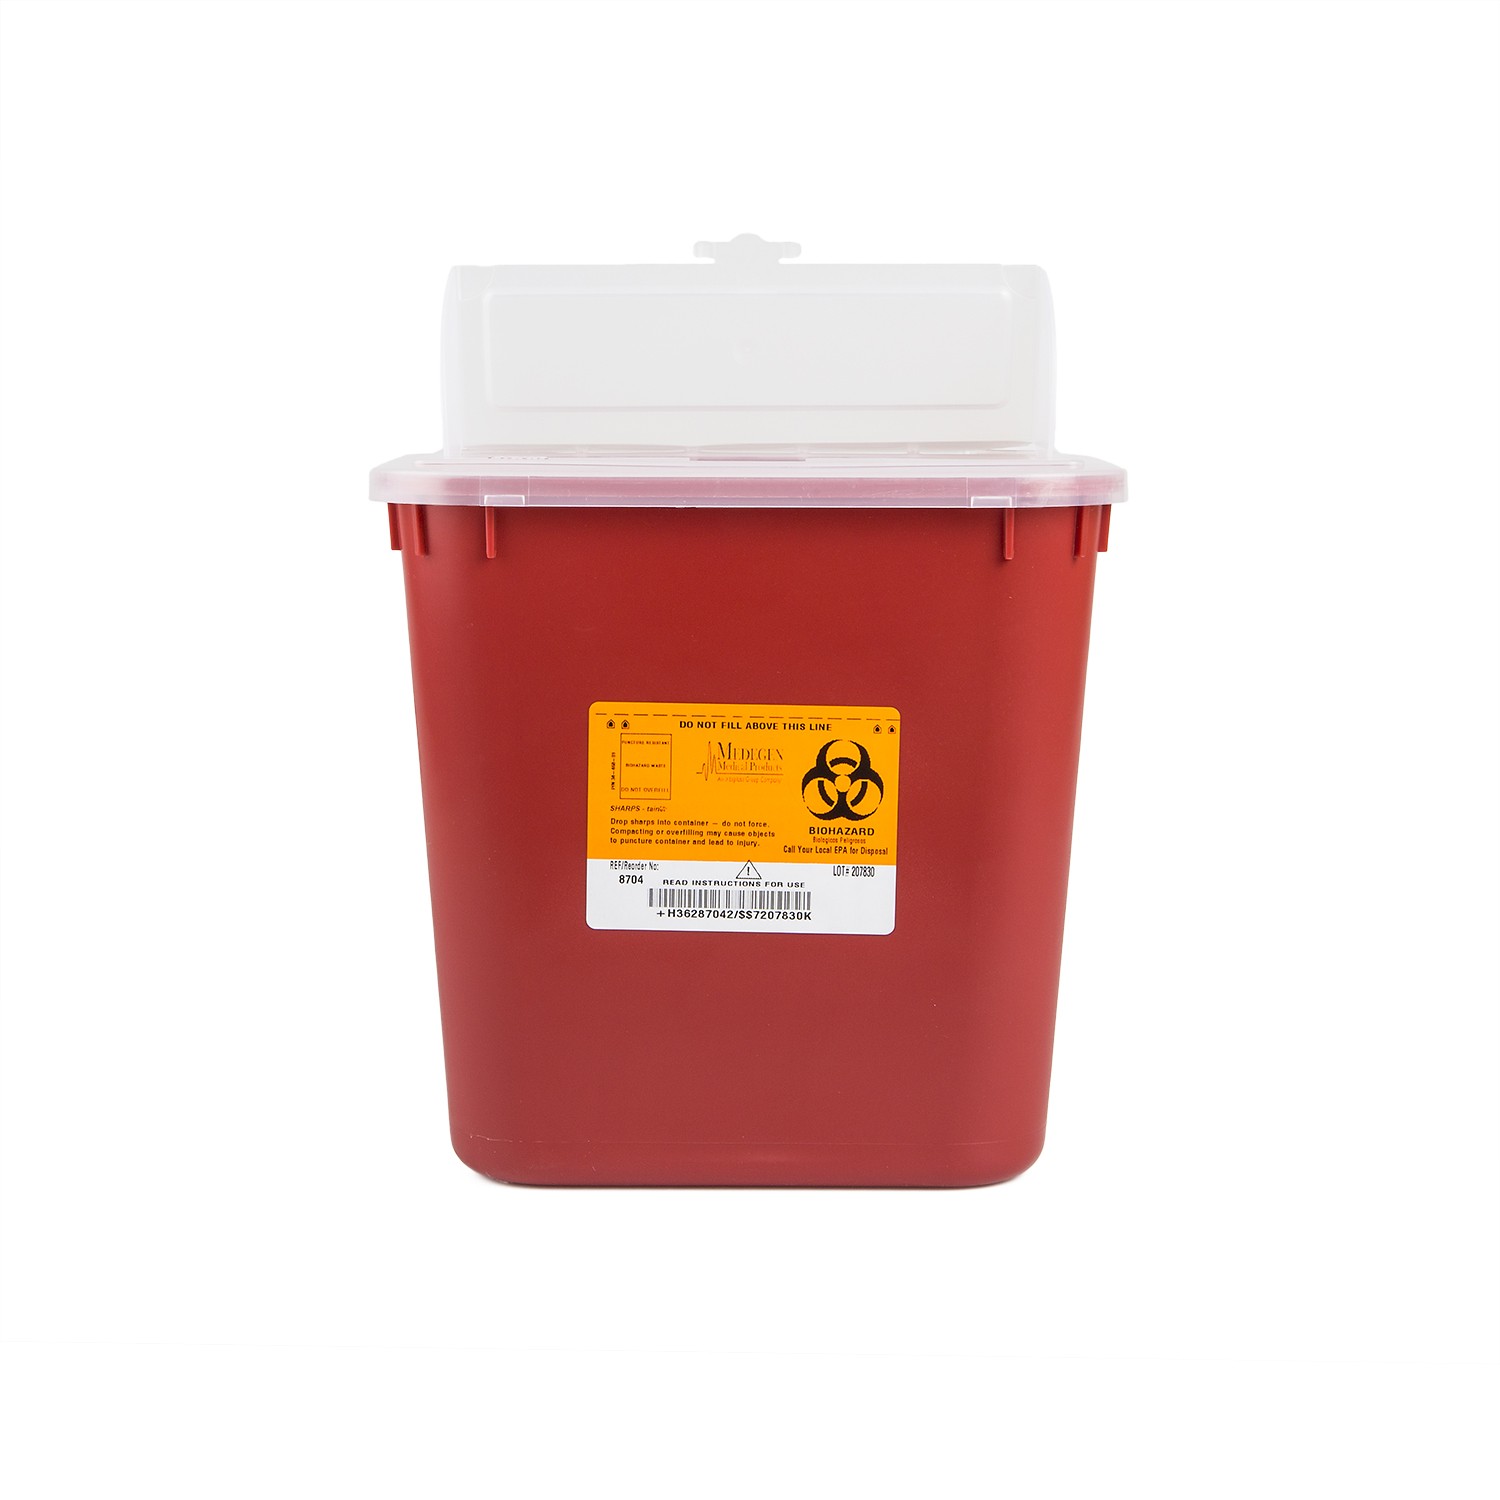 Sharps Container 2 Gallon Red # 4402 - Merit Pharmaceutical